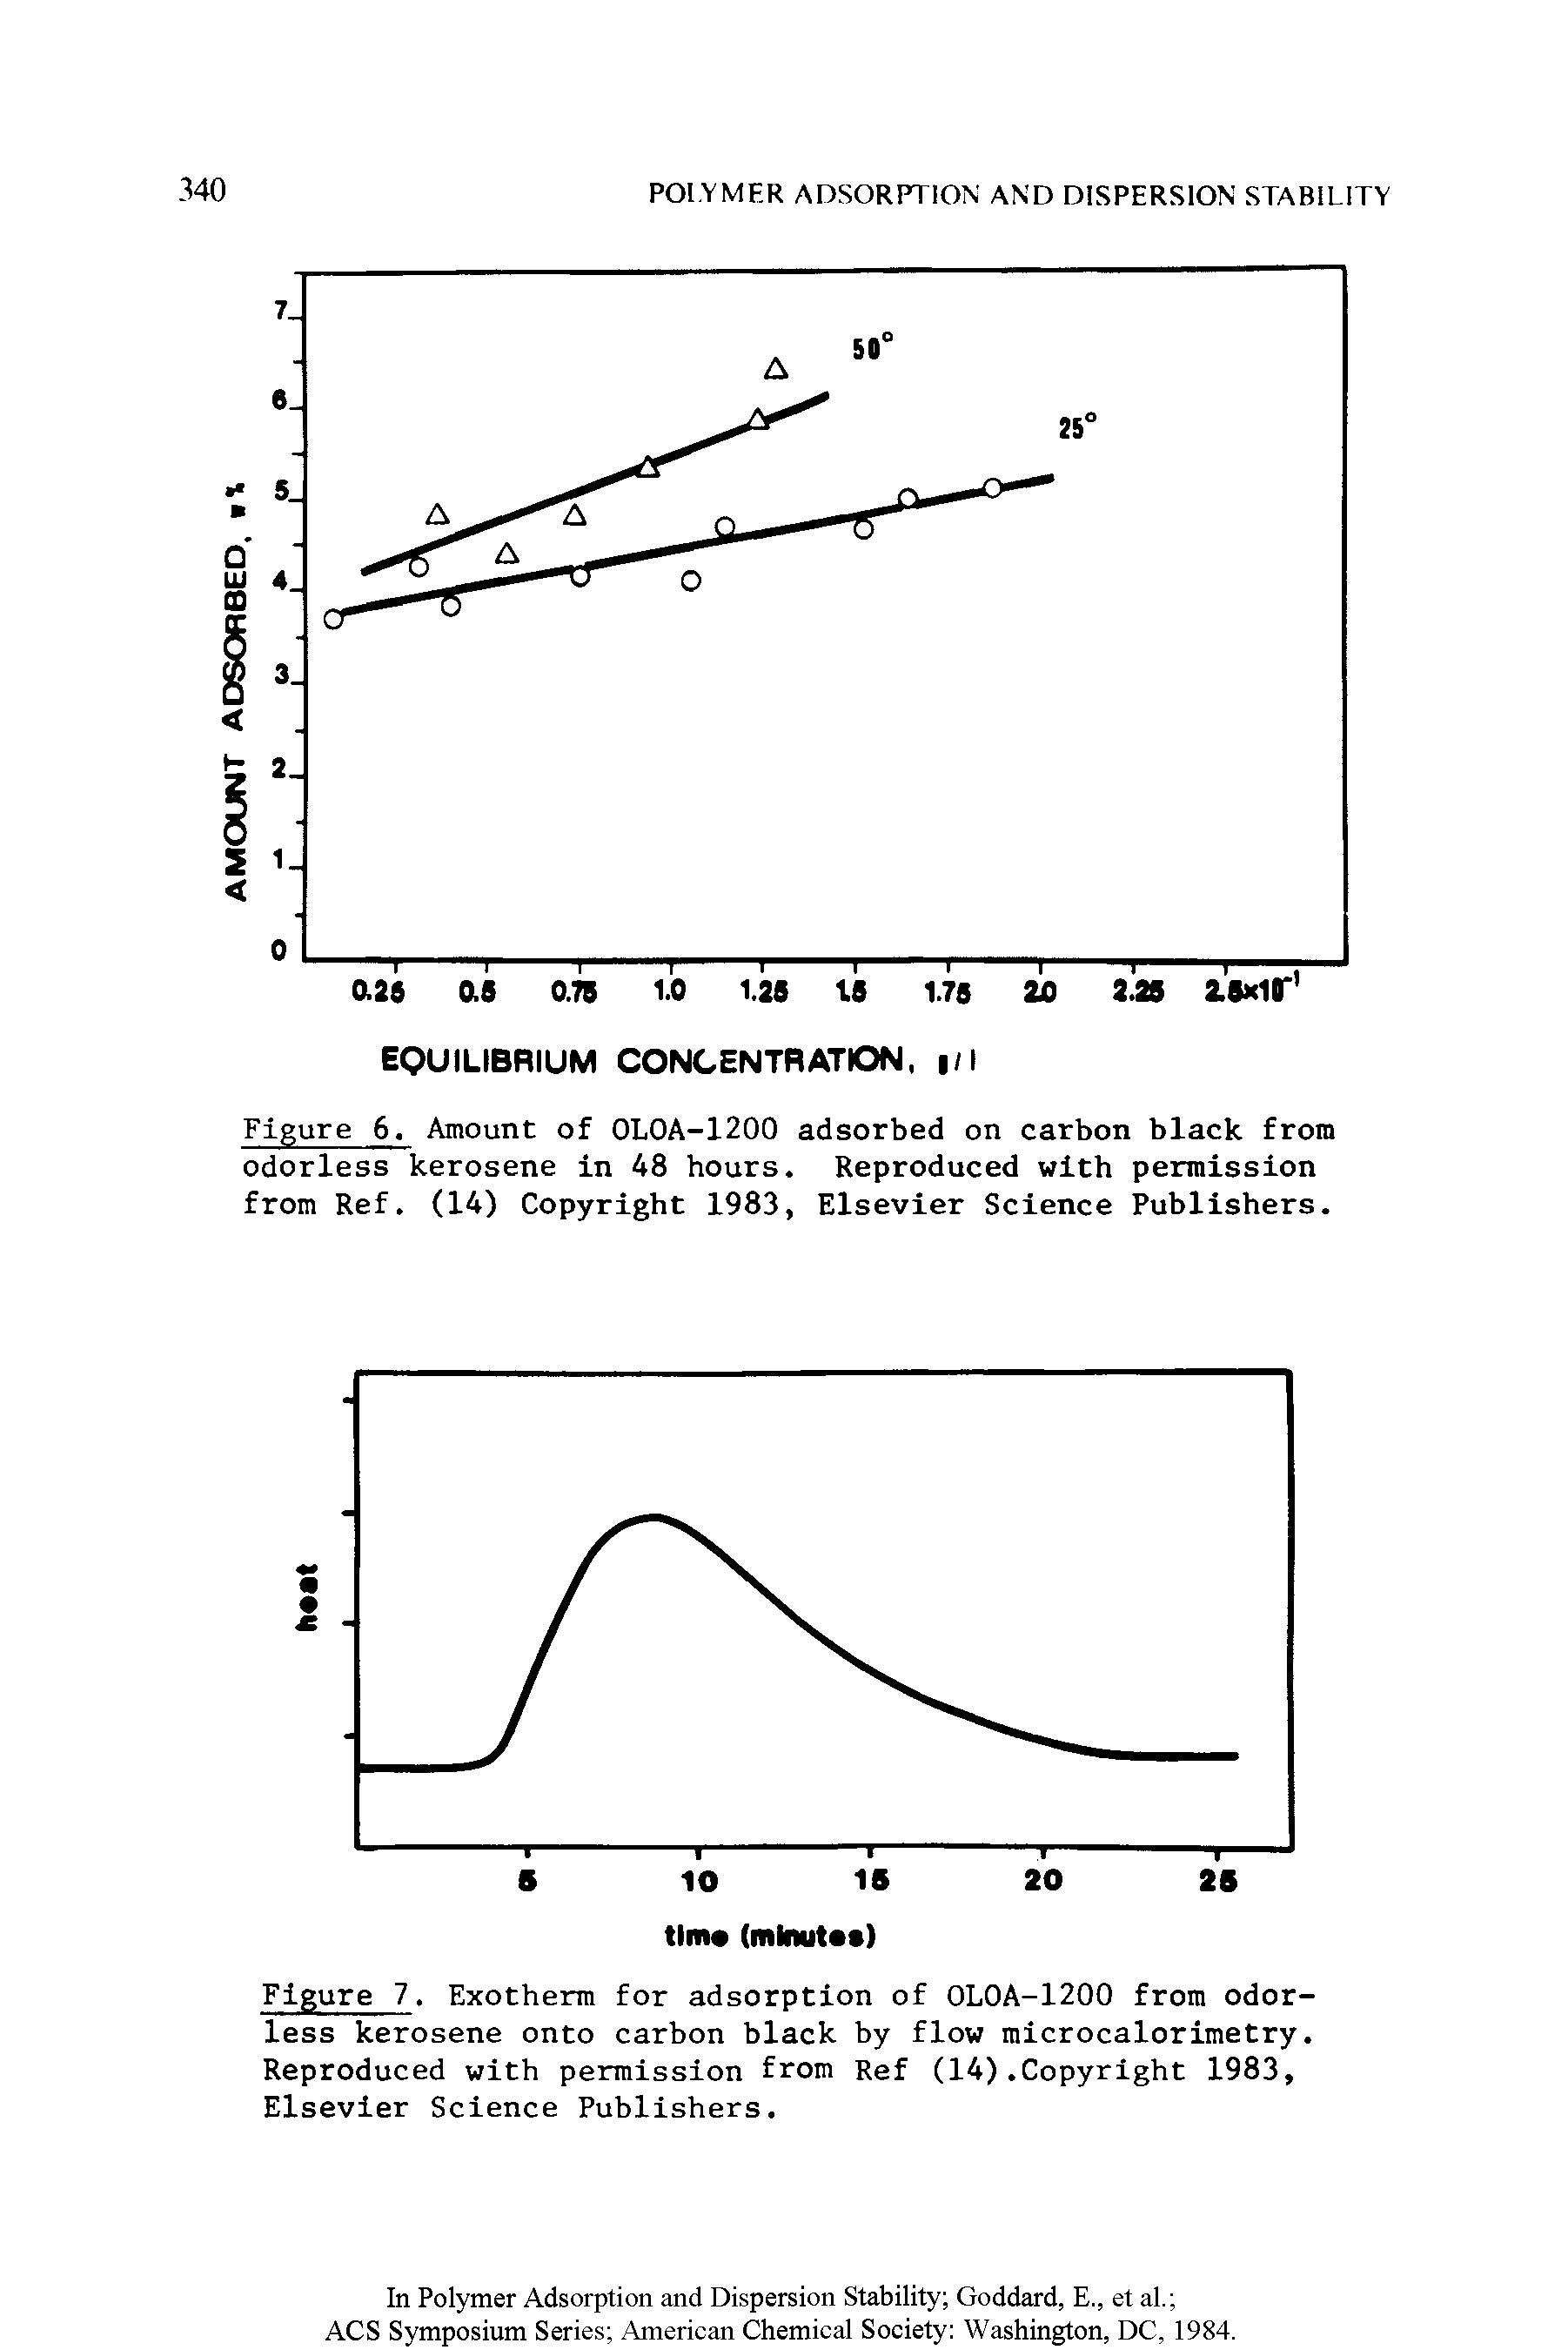 Figure 7. Exotherm for adsorption of OLOA-1200 from odorless kerosene onto carbon black by flow microcalorimetry. Reproduced with permission from Ref (14).Copyright 1983, Elsevier Science Publishers.